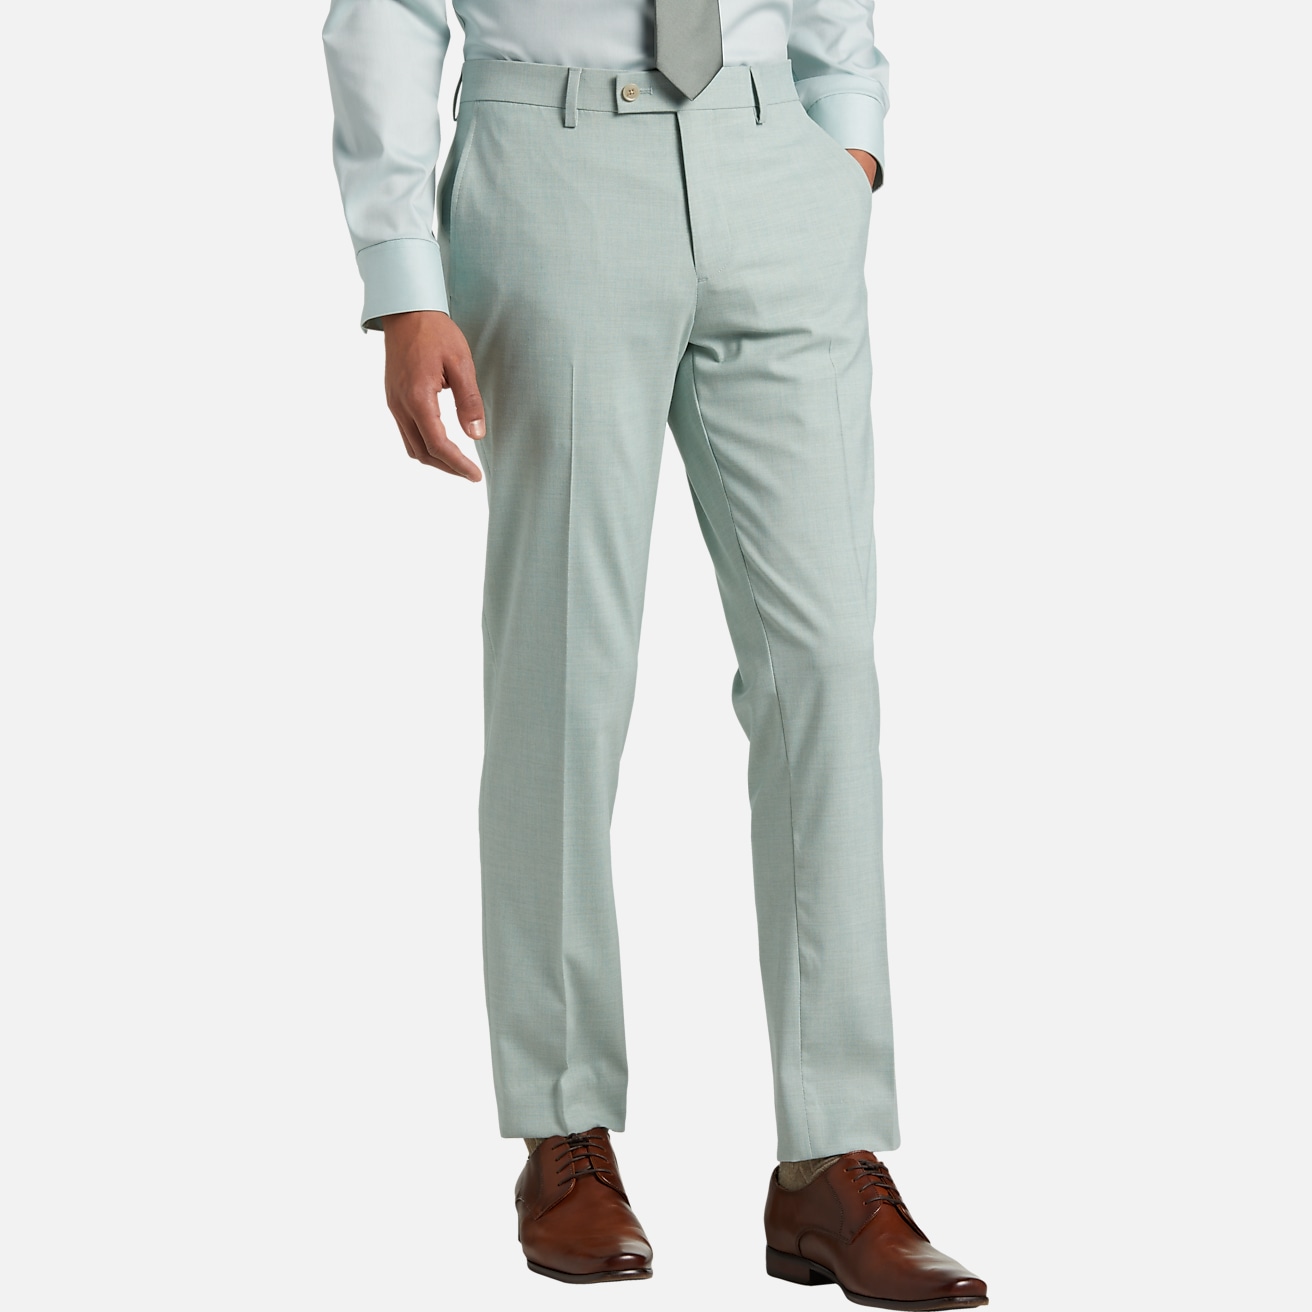 Men's Mint Green Skinny Slim Fit Suits Jacket Pant Formal Party Wedding  Tuxedos